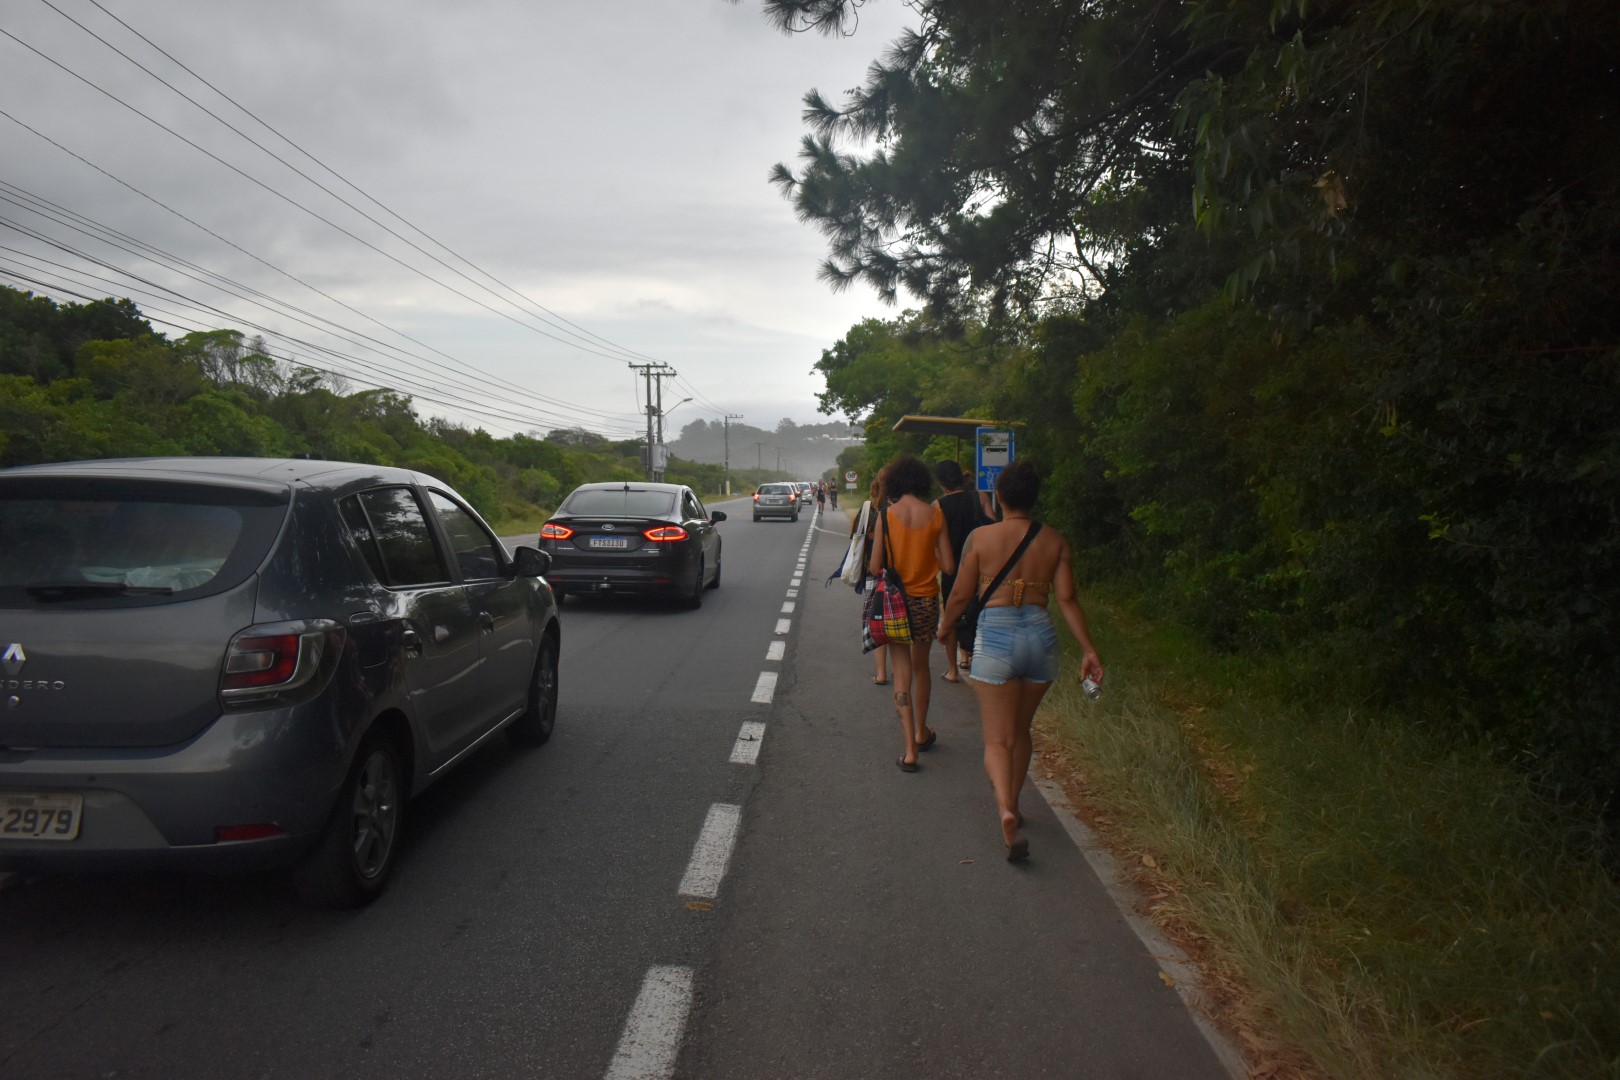 Traffic jam back to Florianópolis Centro, walking on the side of the road...